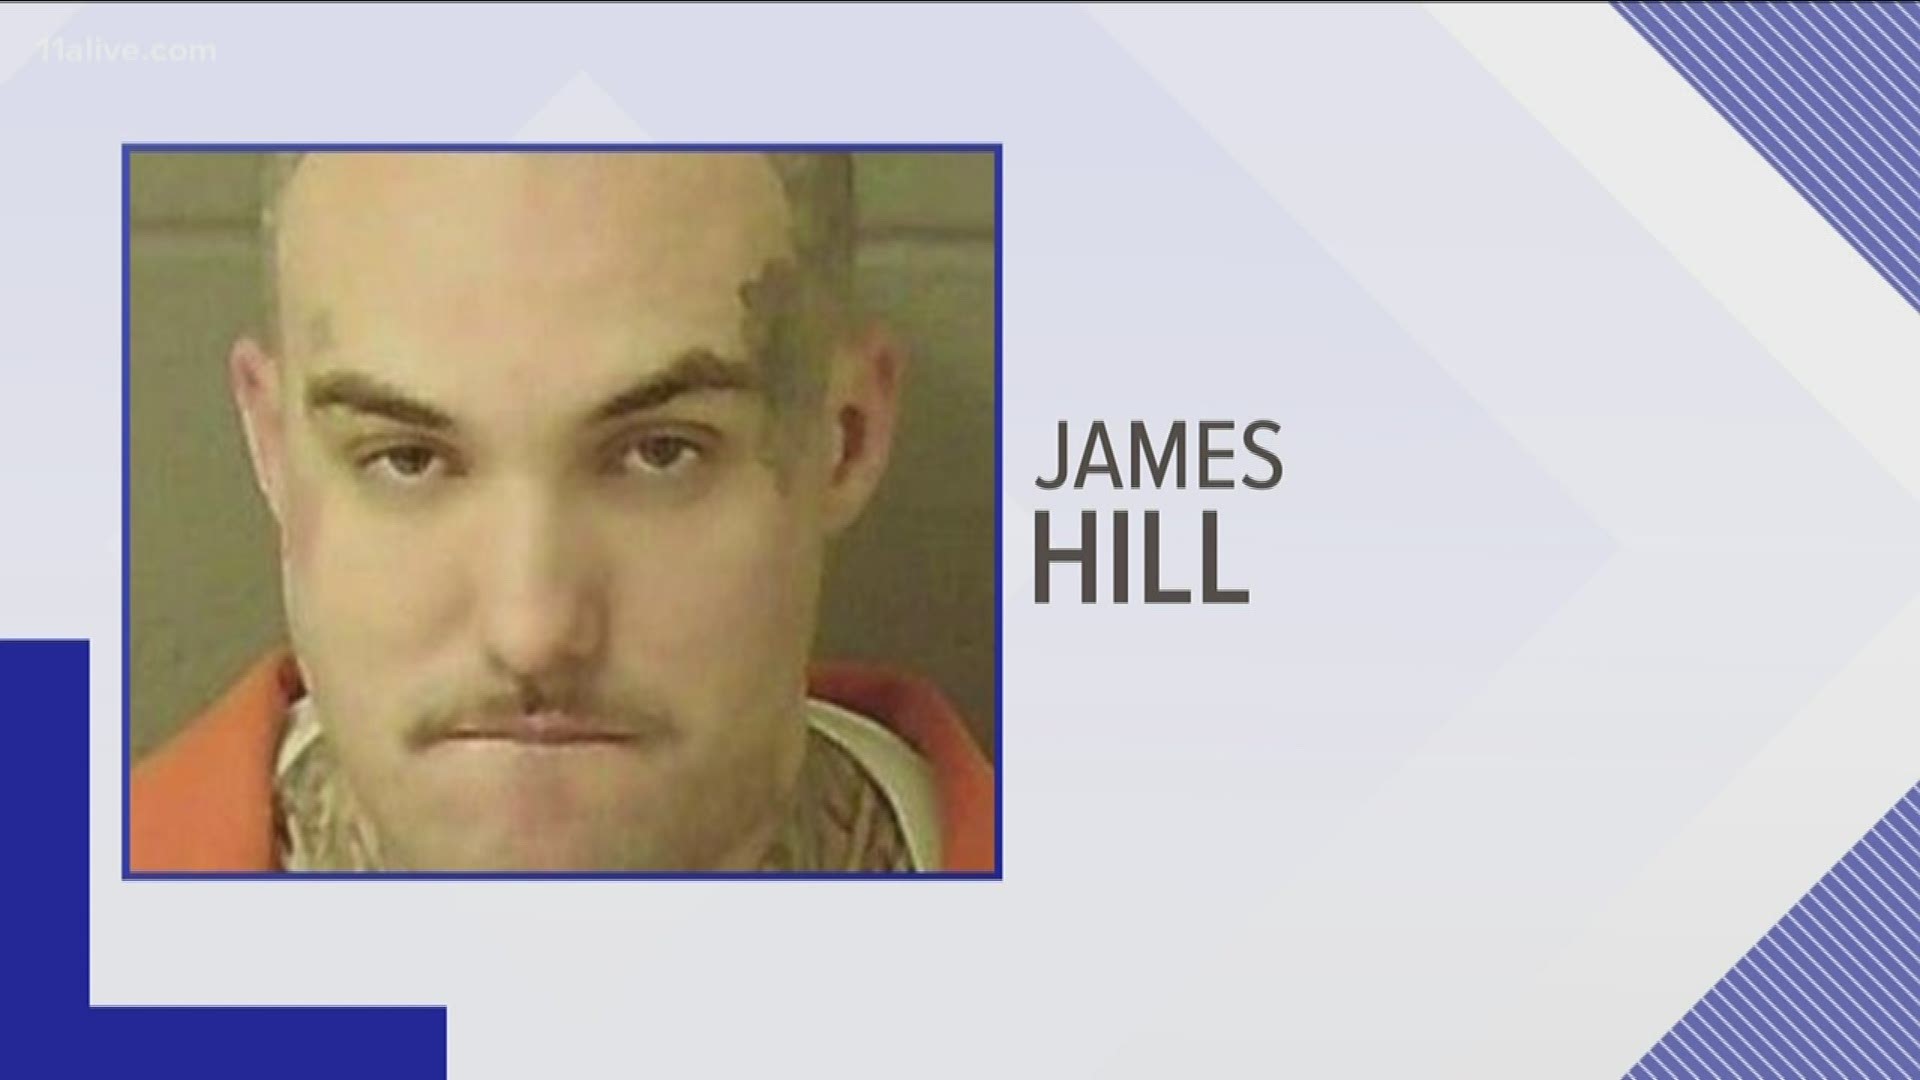 James Hill is also accused of leaving the victim's body under a bridge.